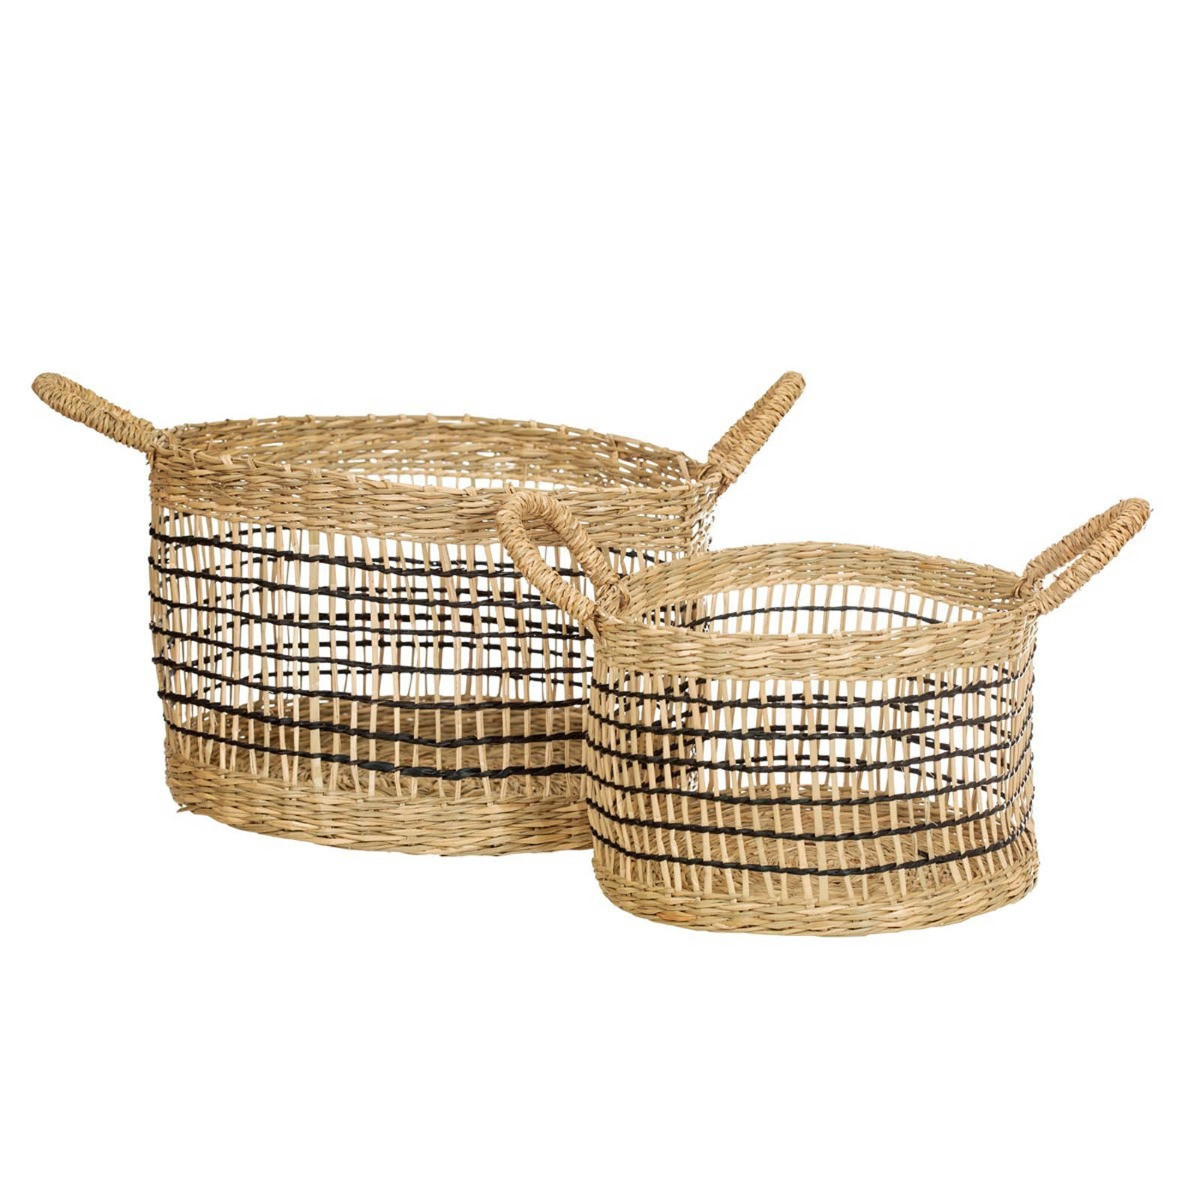 Sass & Belle Seagrass Open Weave Baskets, 2 Pack - Natural>